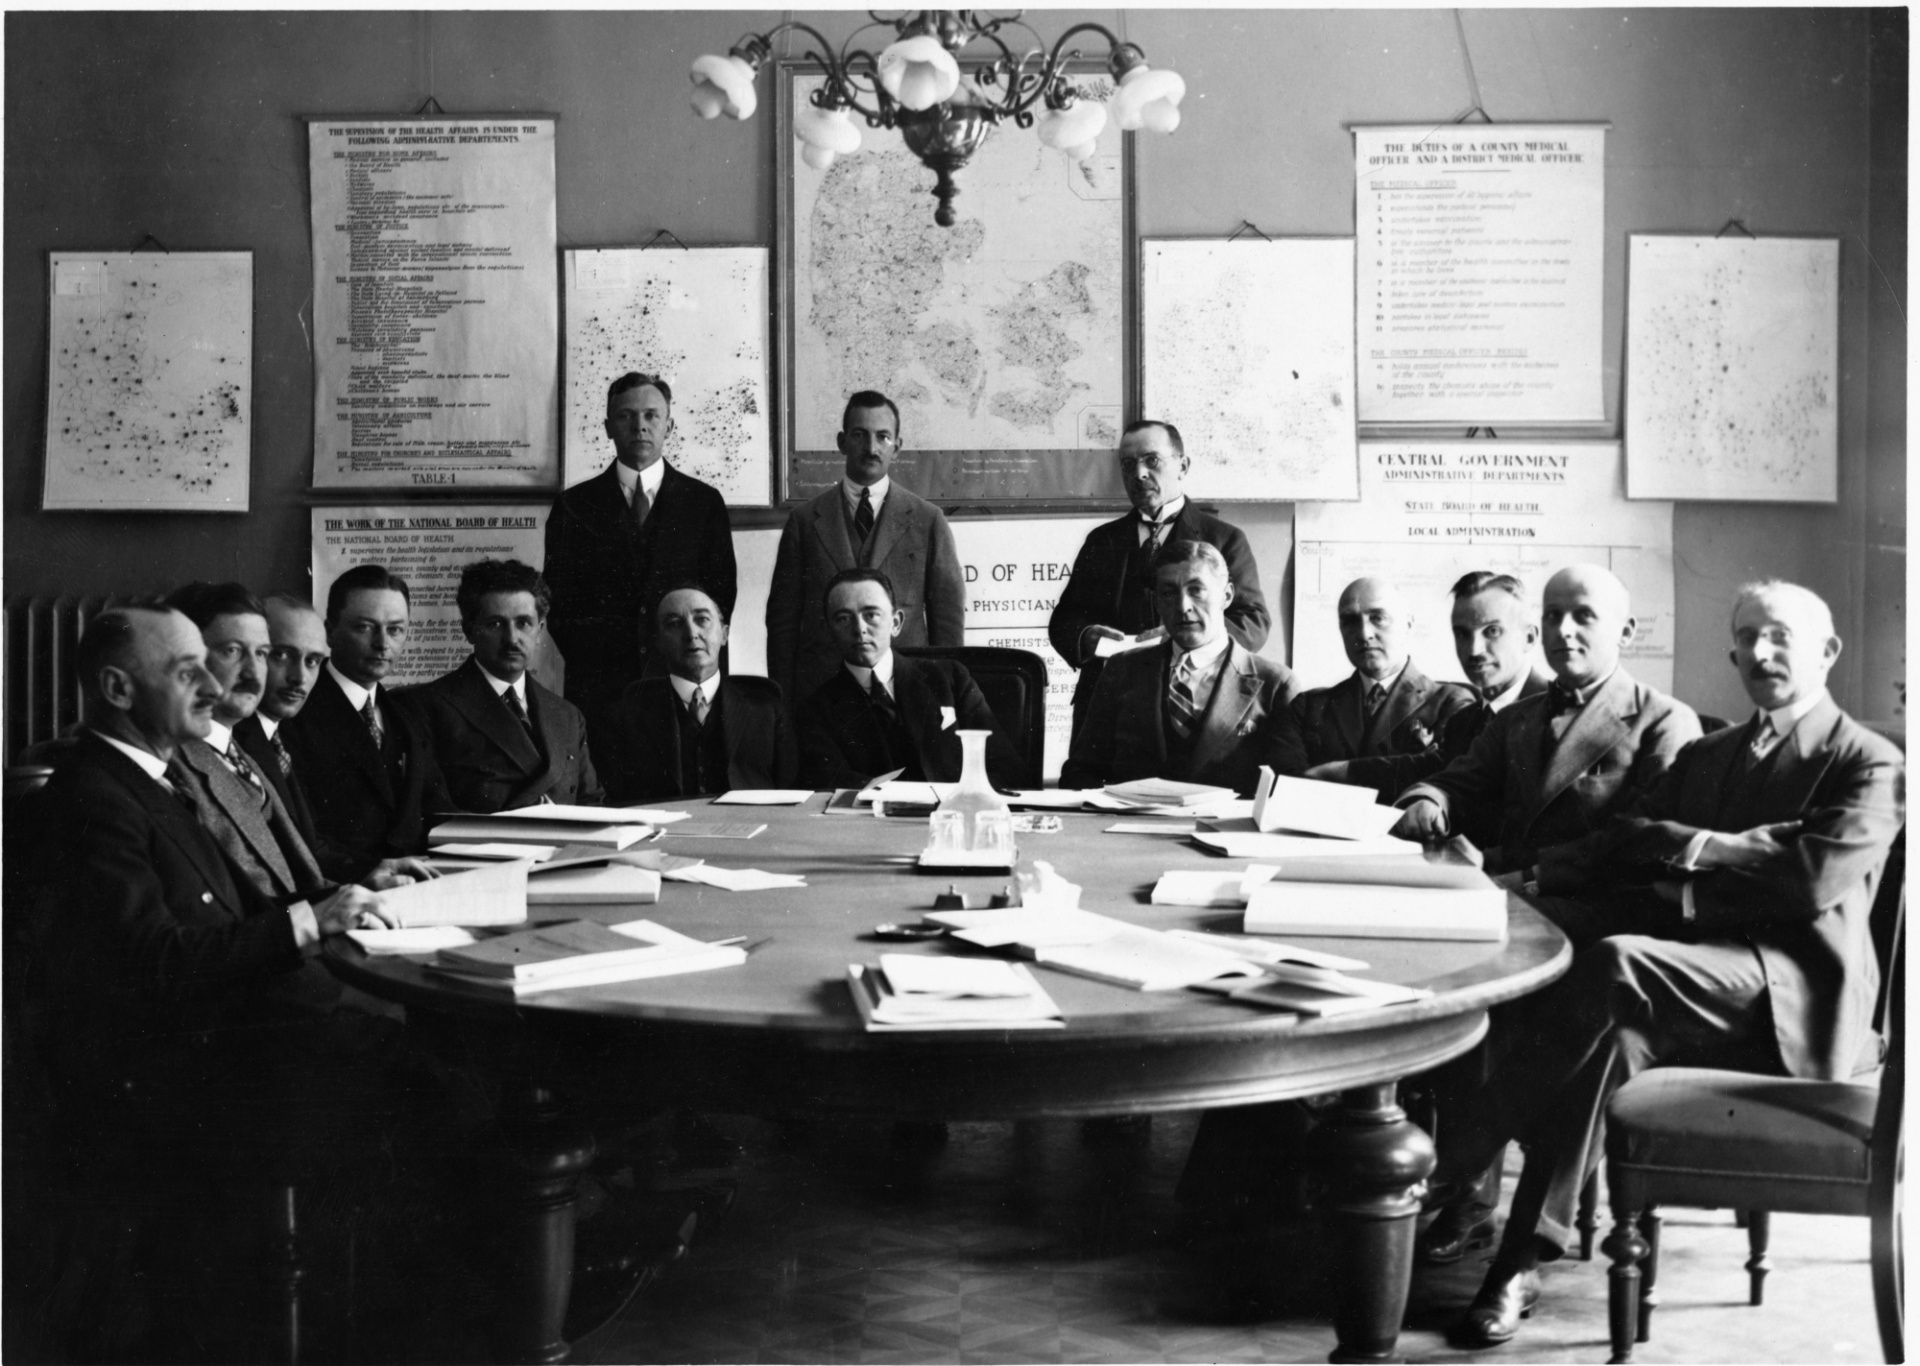 A group of men sitting around a table in a black and white photograph. On the wall behind the group are several large posters and maps. 